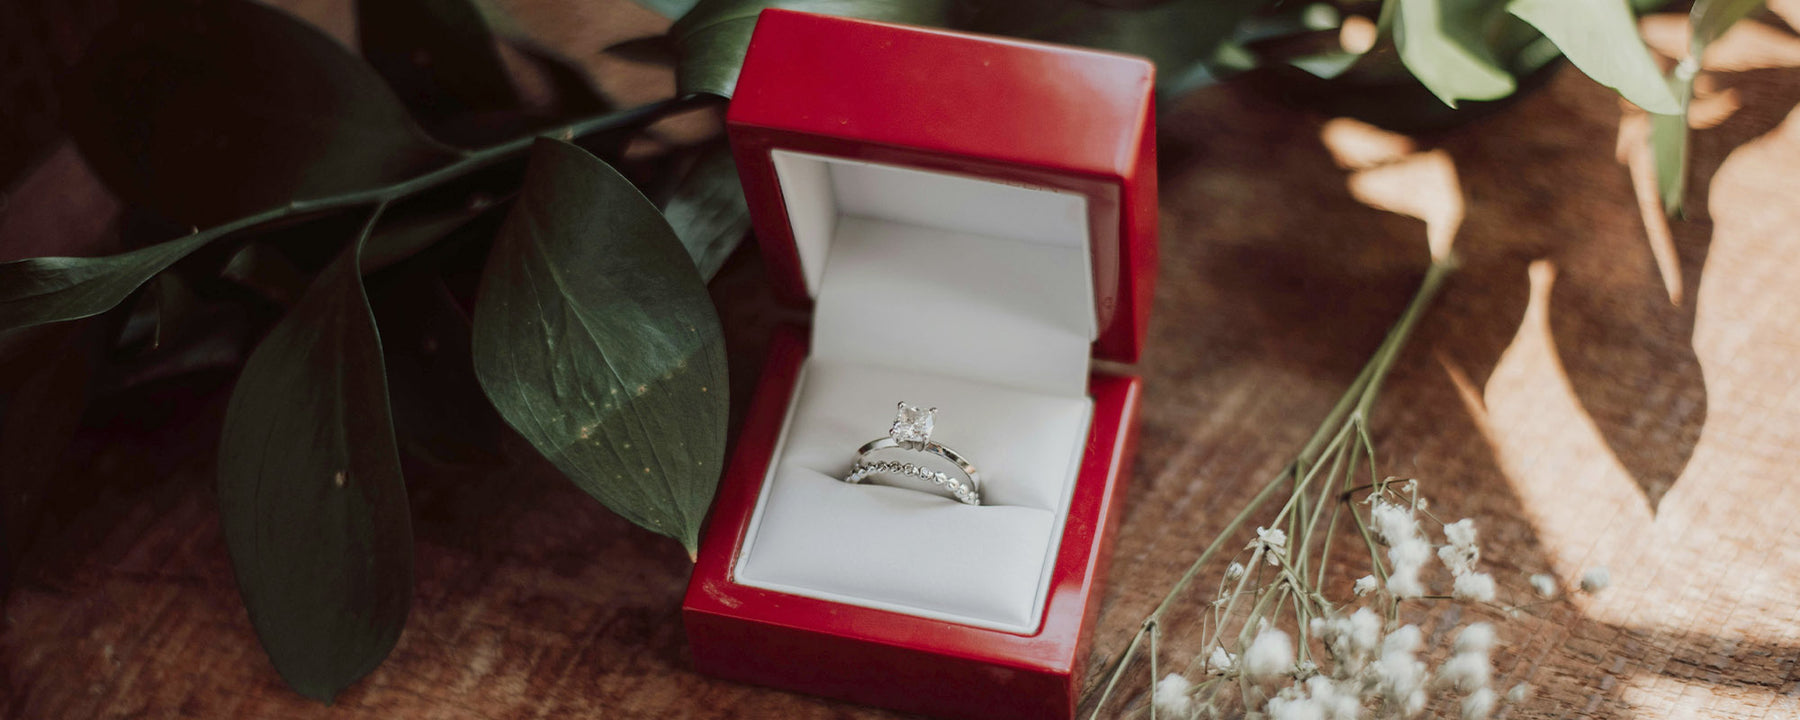 advantages of buying a second hand engagement ring